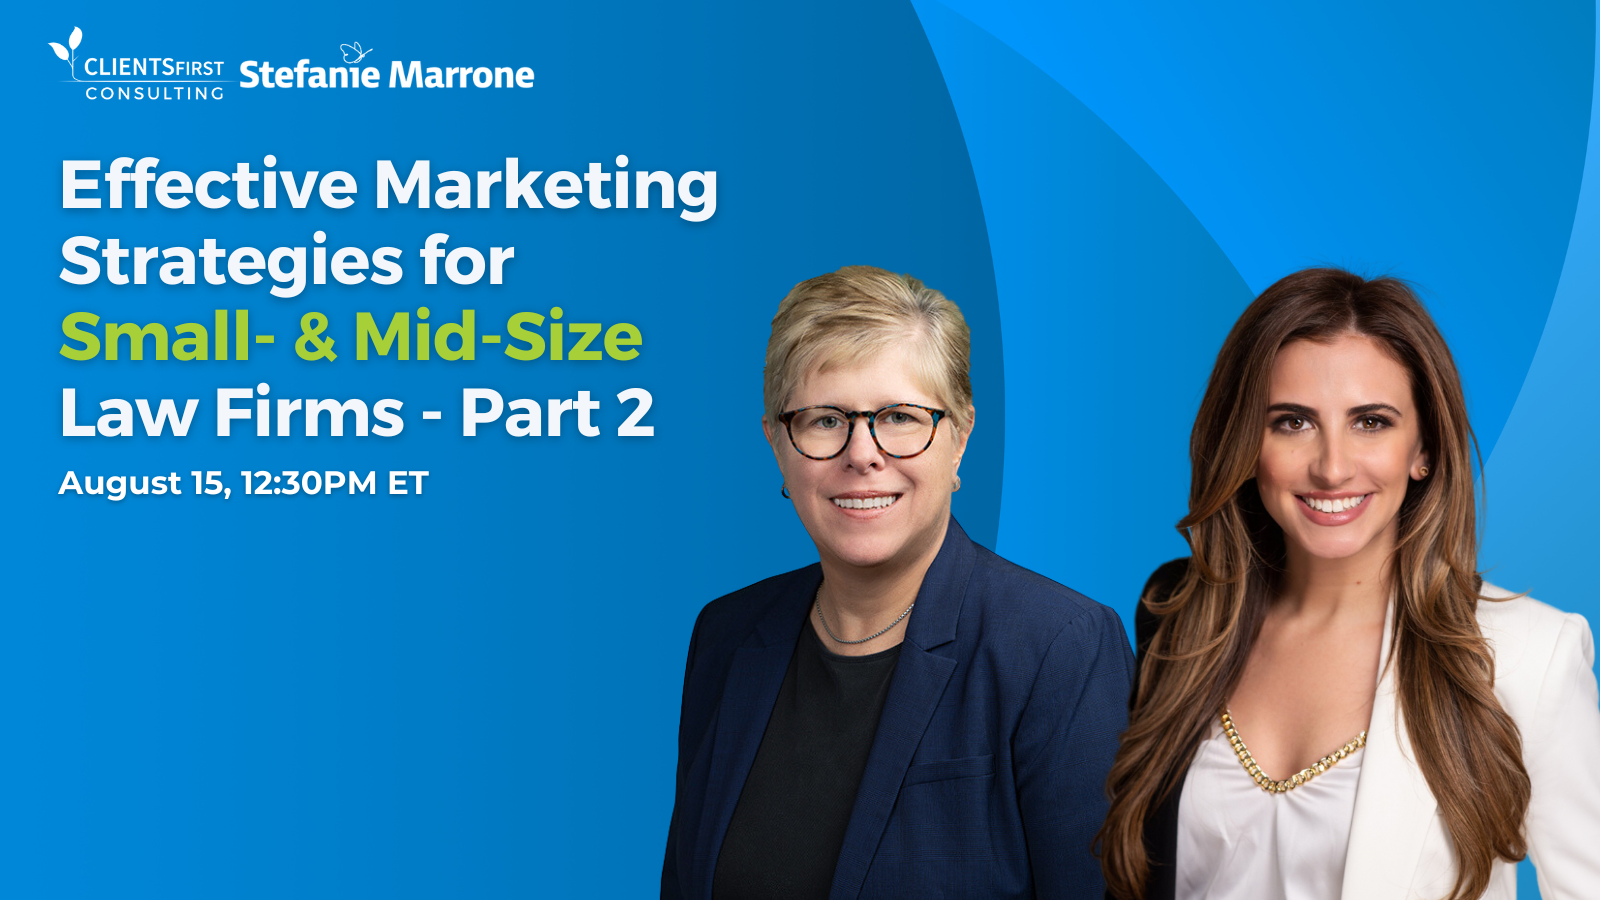 Seven Reasons To Attend Our Effective Marketing Strategies For Small, Boutique And Mid-size Law Firms Webinar